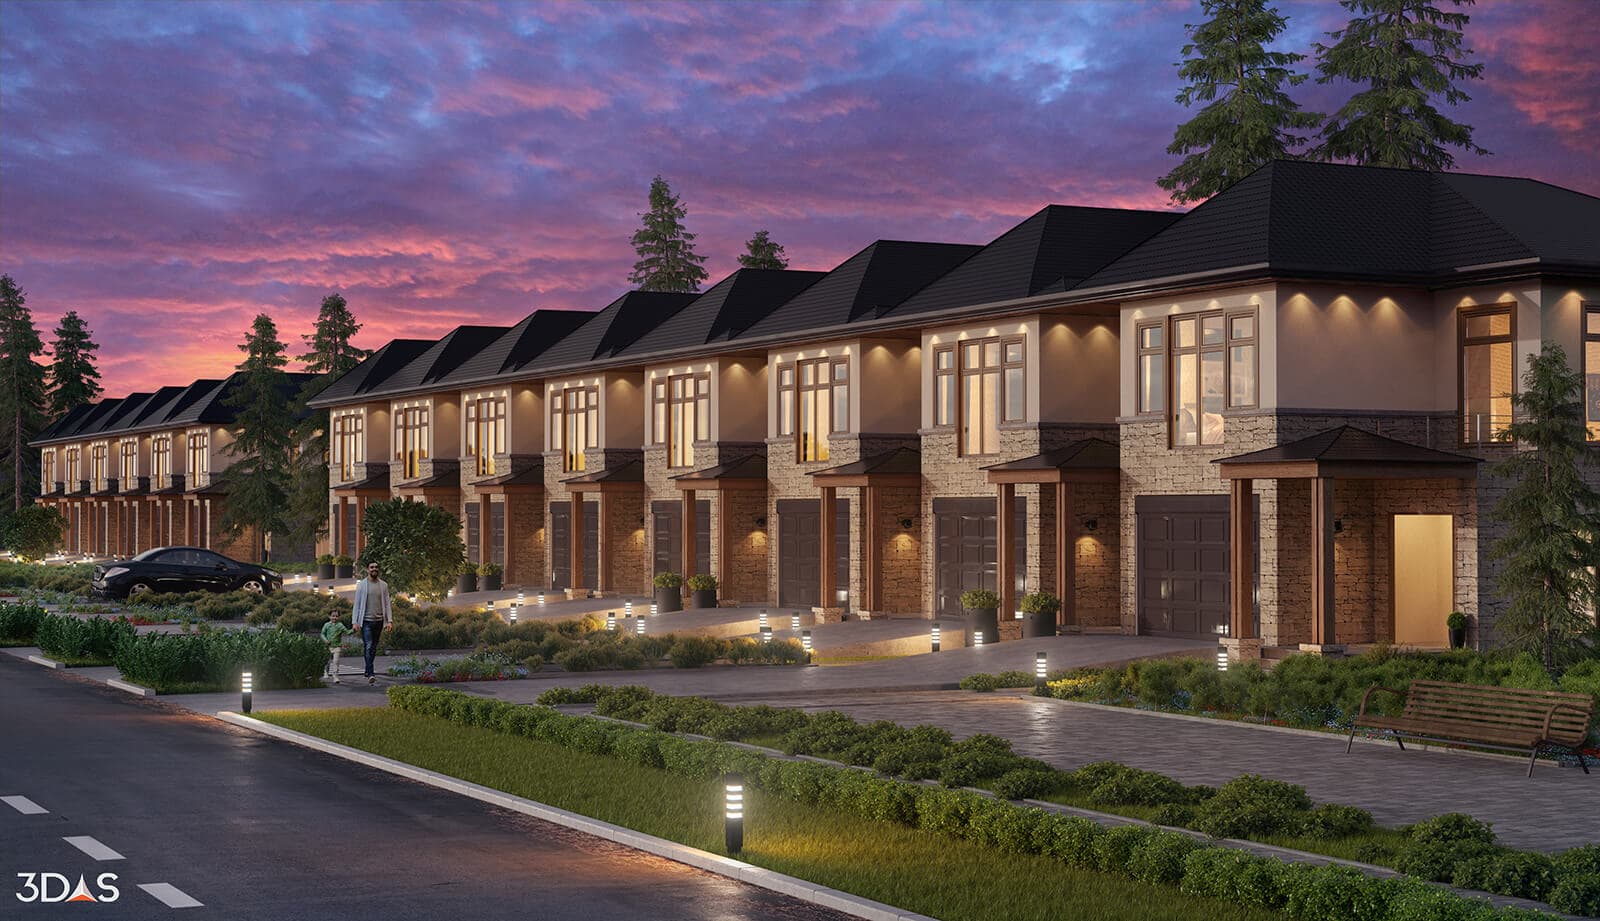 3D Rendering of Onyx / Polly residential community at sunset. Finished in 4 days, no CAD.